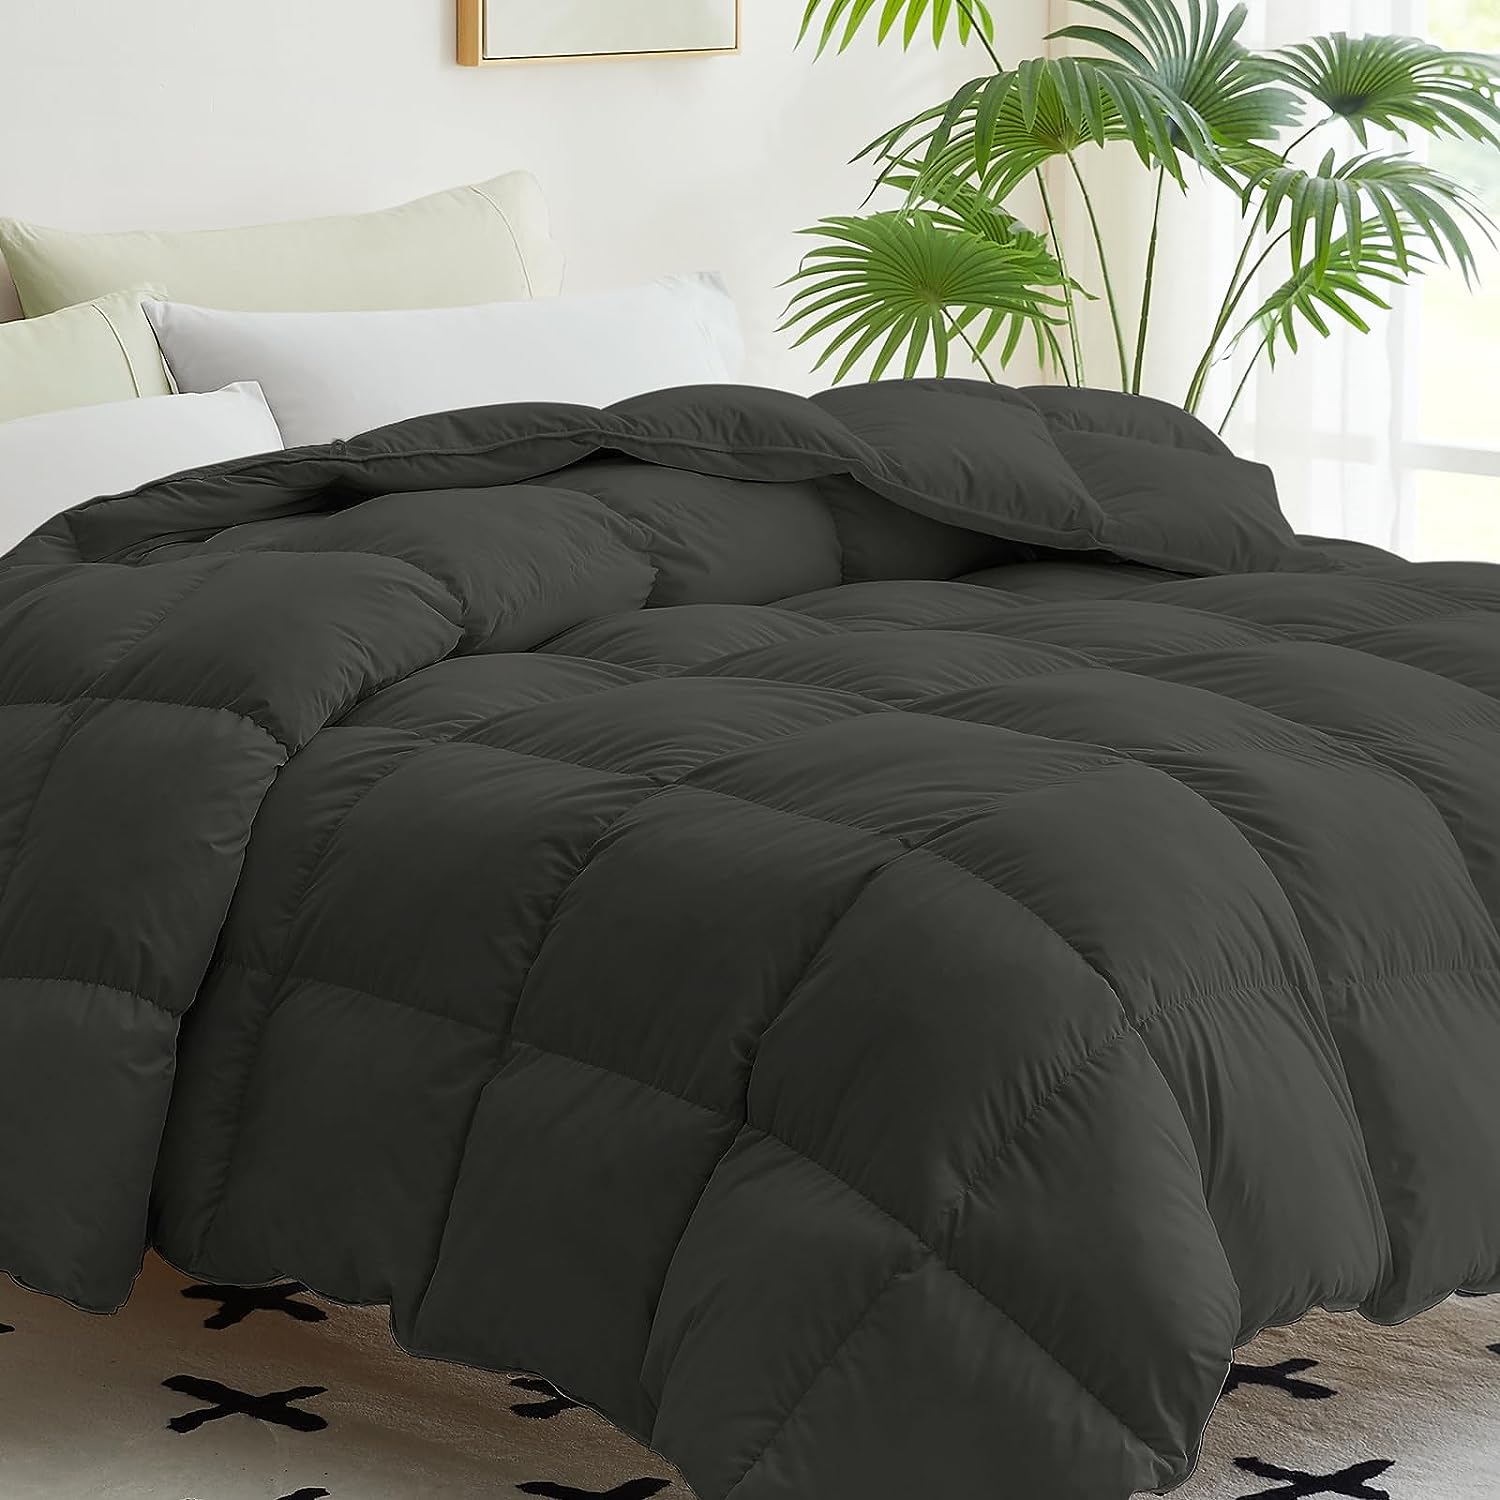 Im so happy with this comforter! As soon as I got it I brought it to the laundromat and washed/dried it. It does say dry clean, but I had no issues washing on a gentle cycle with low temp drying. It came out fluffy. I have a duvet cover for it, so I dont notice any noise like others have mentioned. I got the cal king for my king size bed, so its roomy. It doesnt weigh a ton but its nice and warm. I can keep the windows open and even have the fan on for noise (I got too used to it over the s